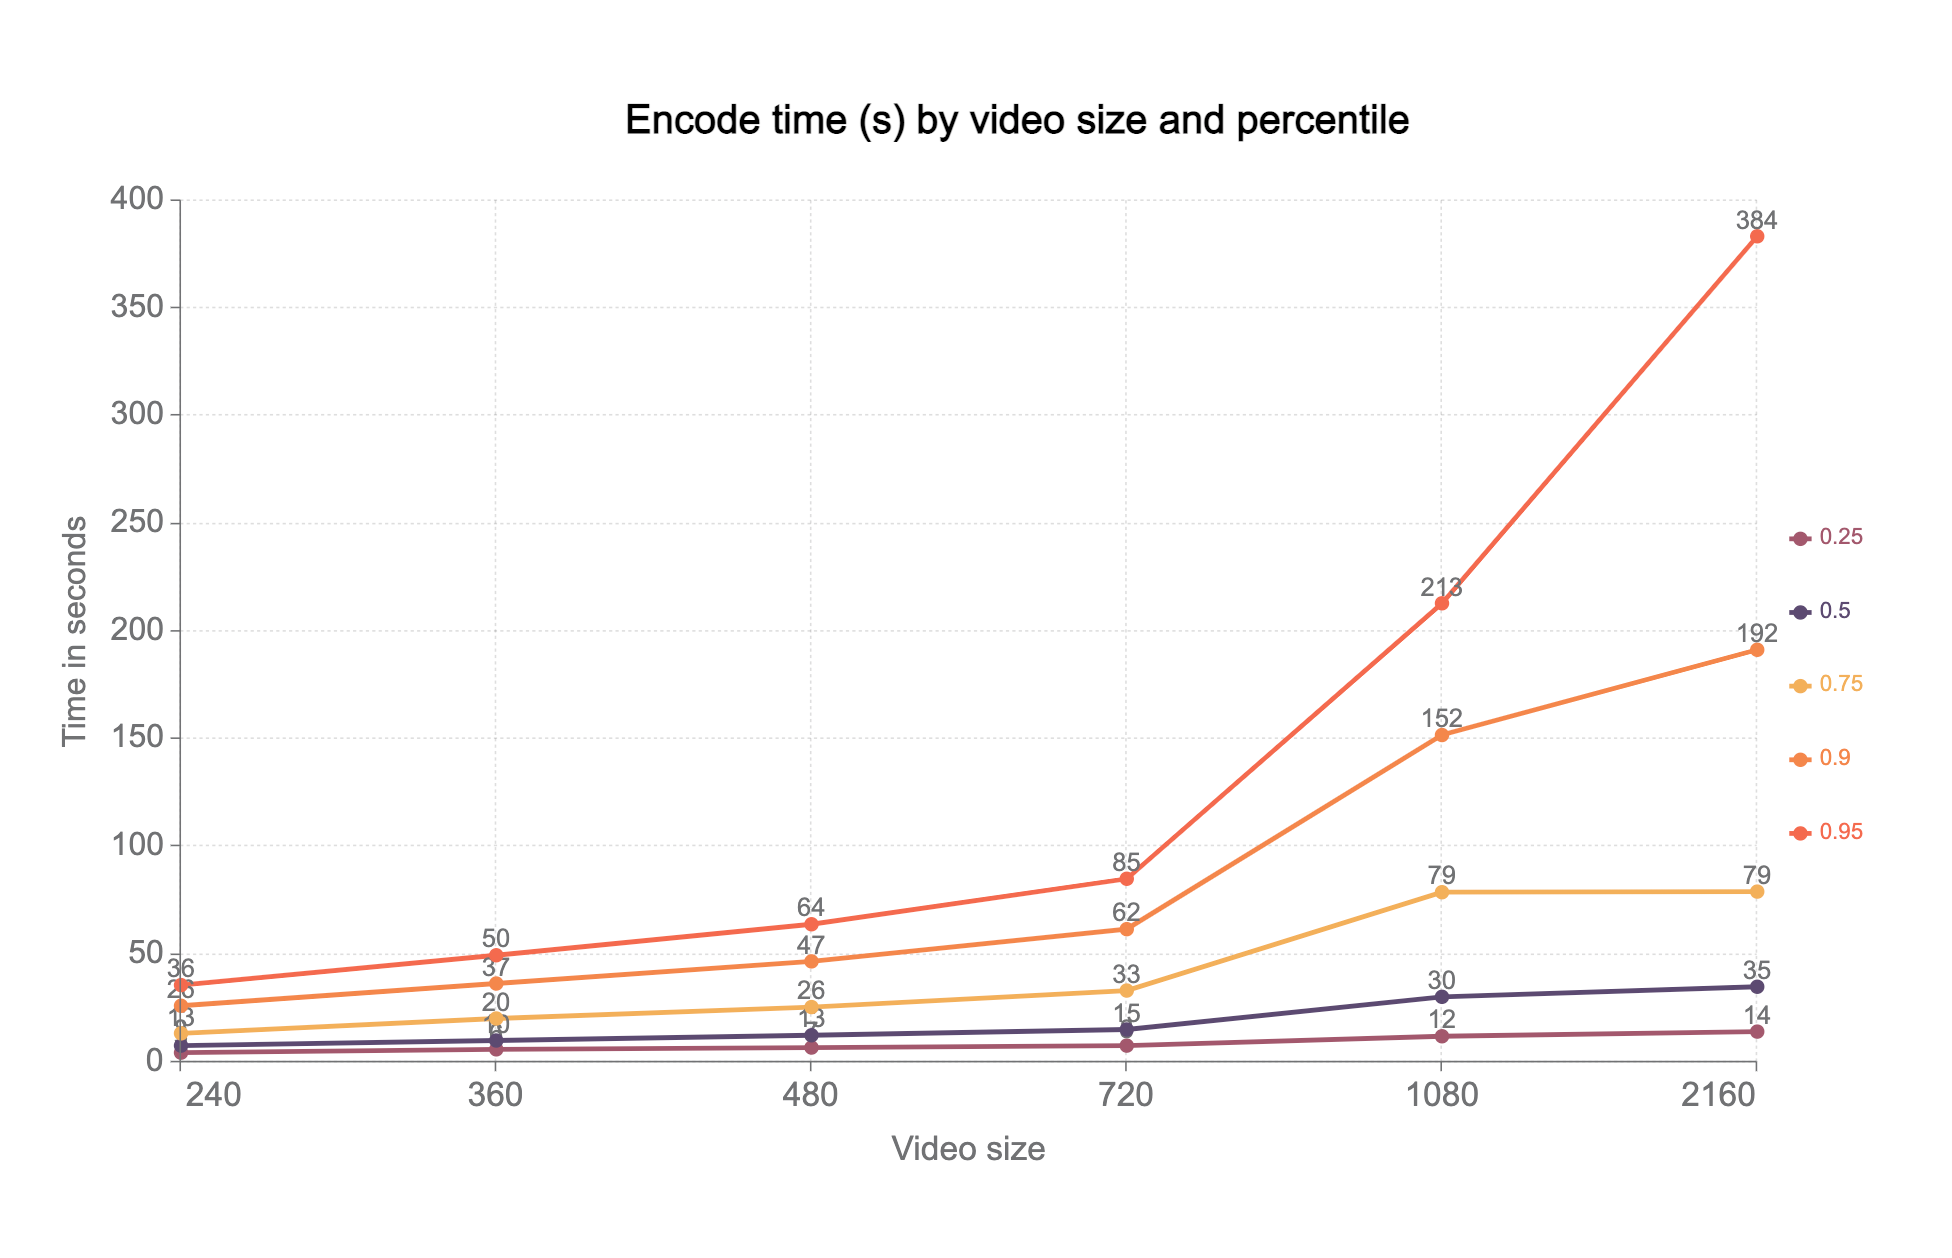 encoding times for videos 0-5 minutes